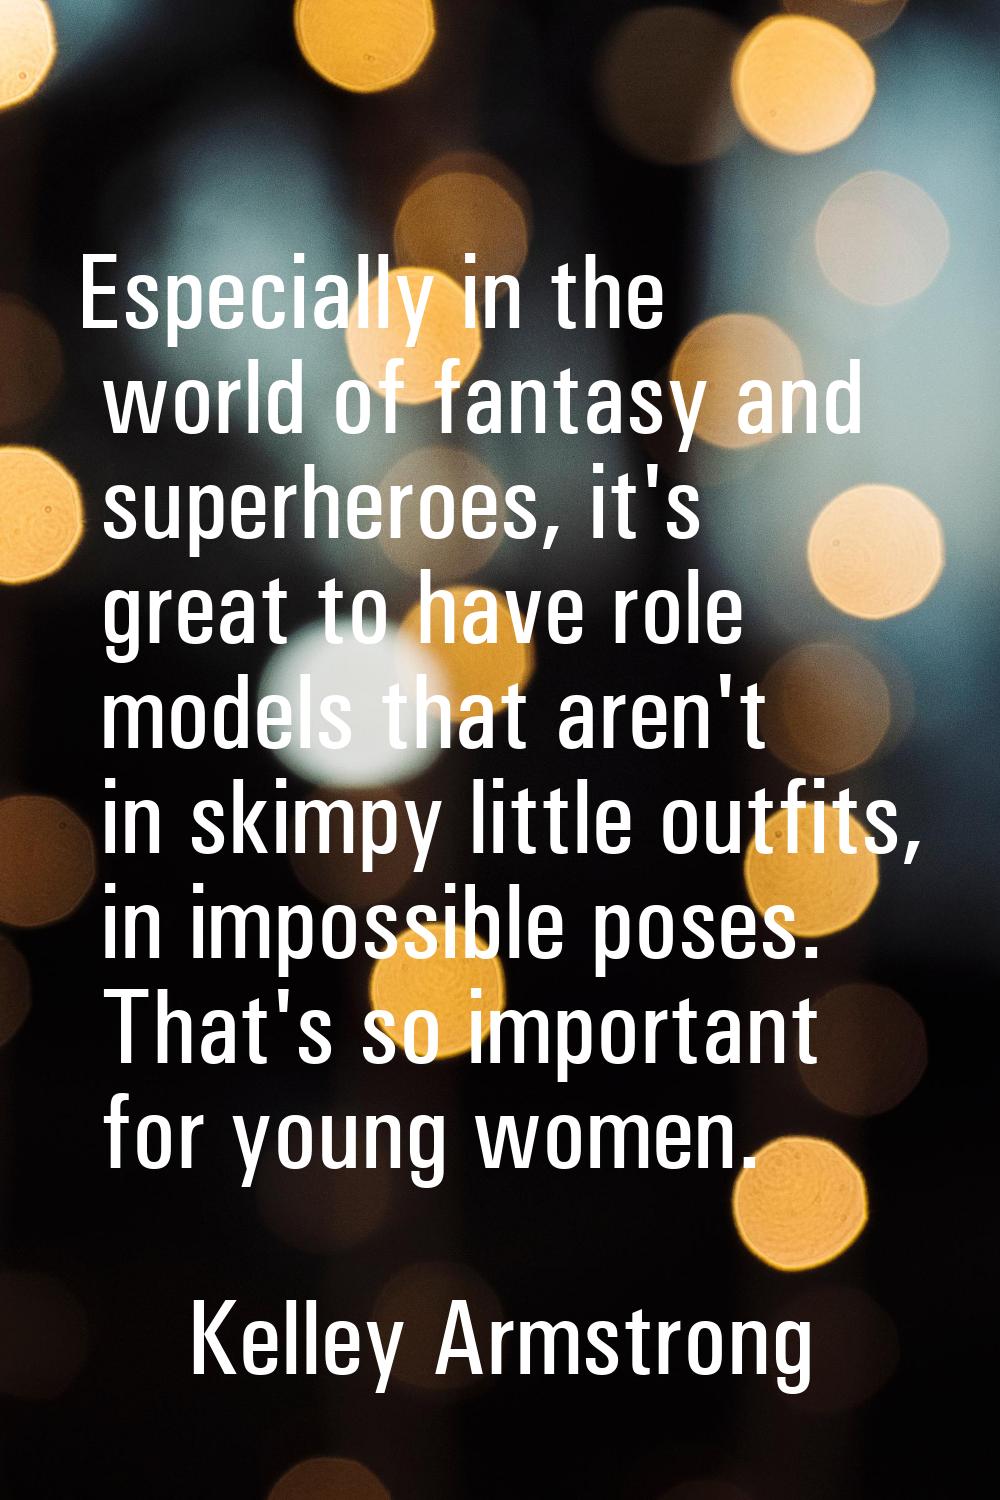 Especially in the world of fantasy and superheroes, it's great to have role models that aren't in s